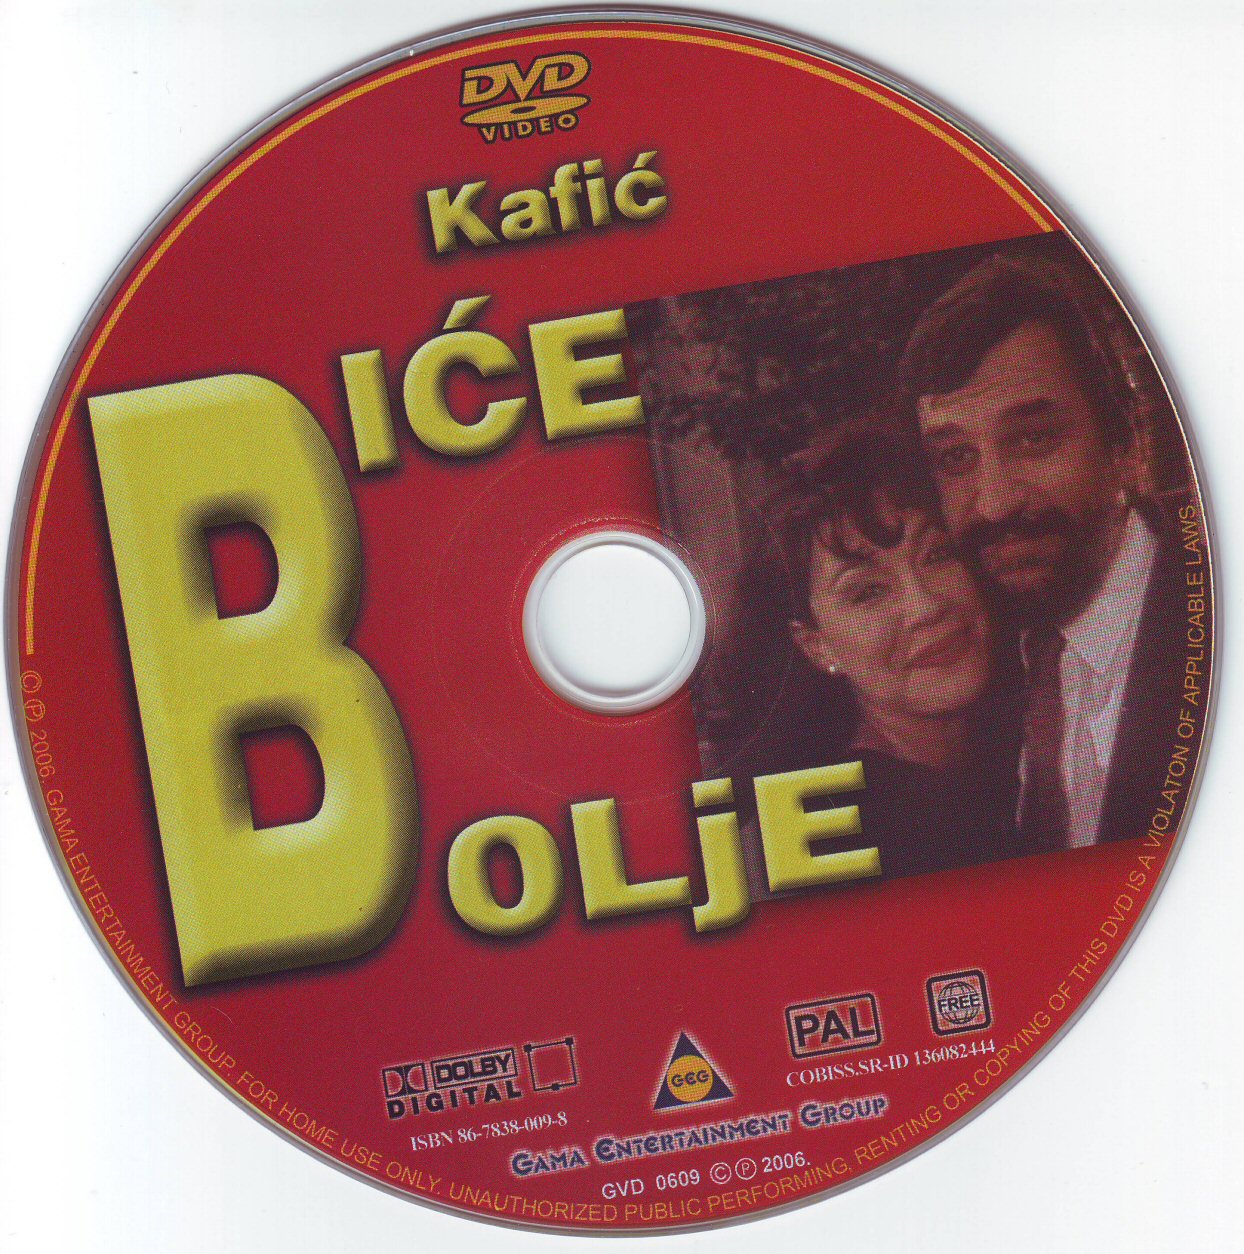 Click to view full size image -  DVD Cover - K - DVD - KAFIC BICE BOLJE - CD - DVD - KAFIC BICE BOLJE - CD.jpg